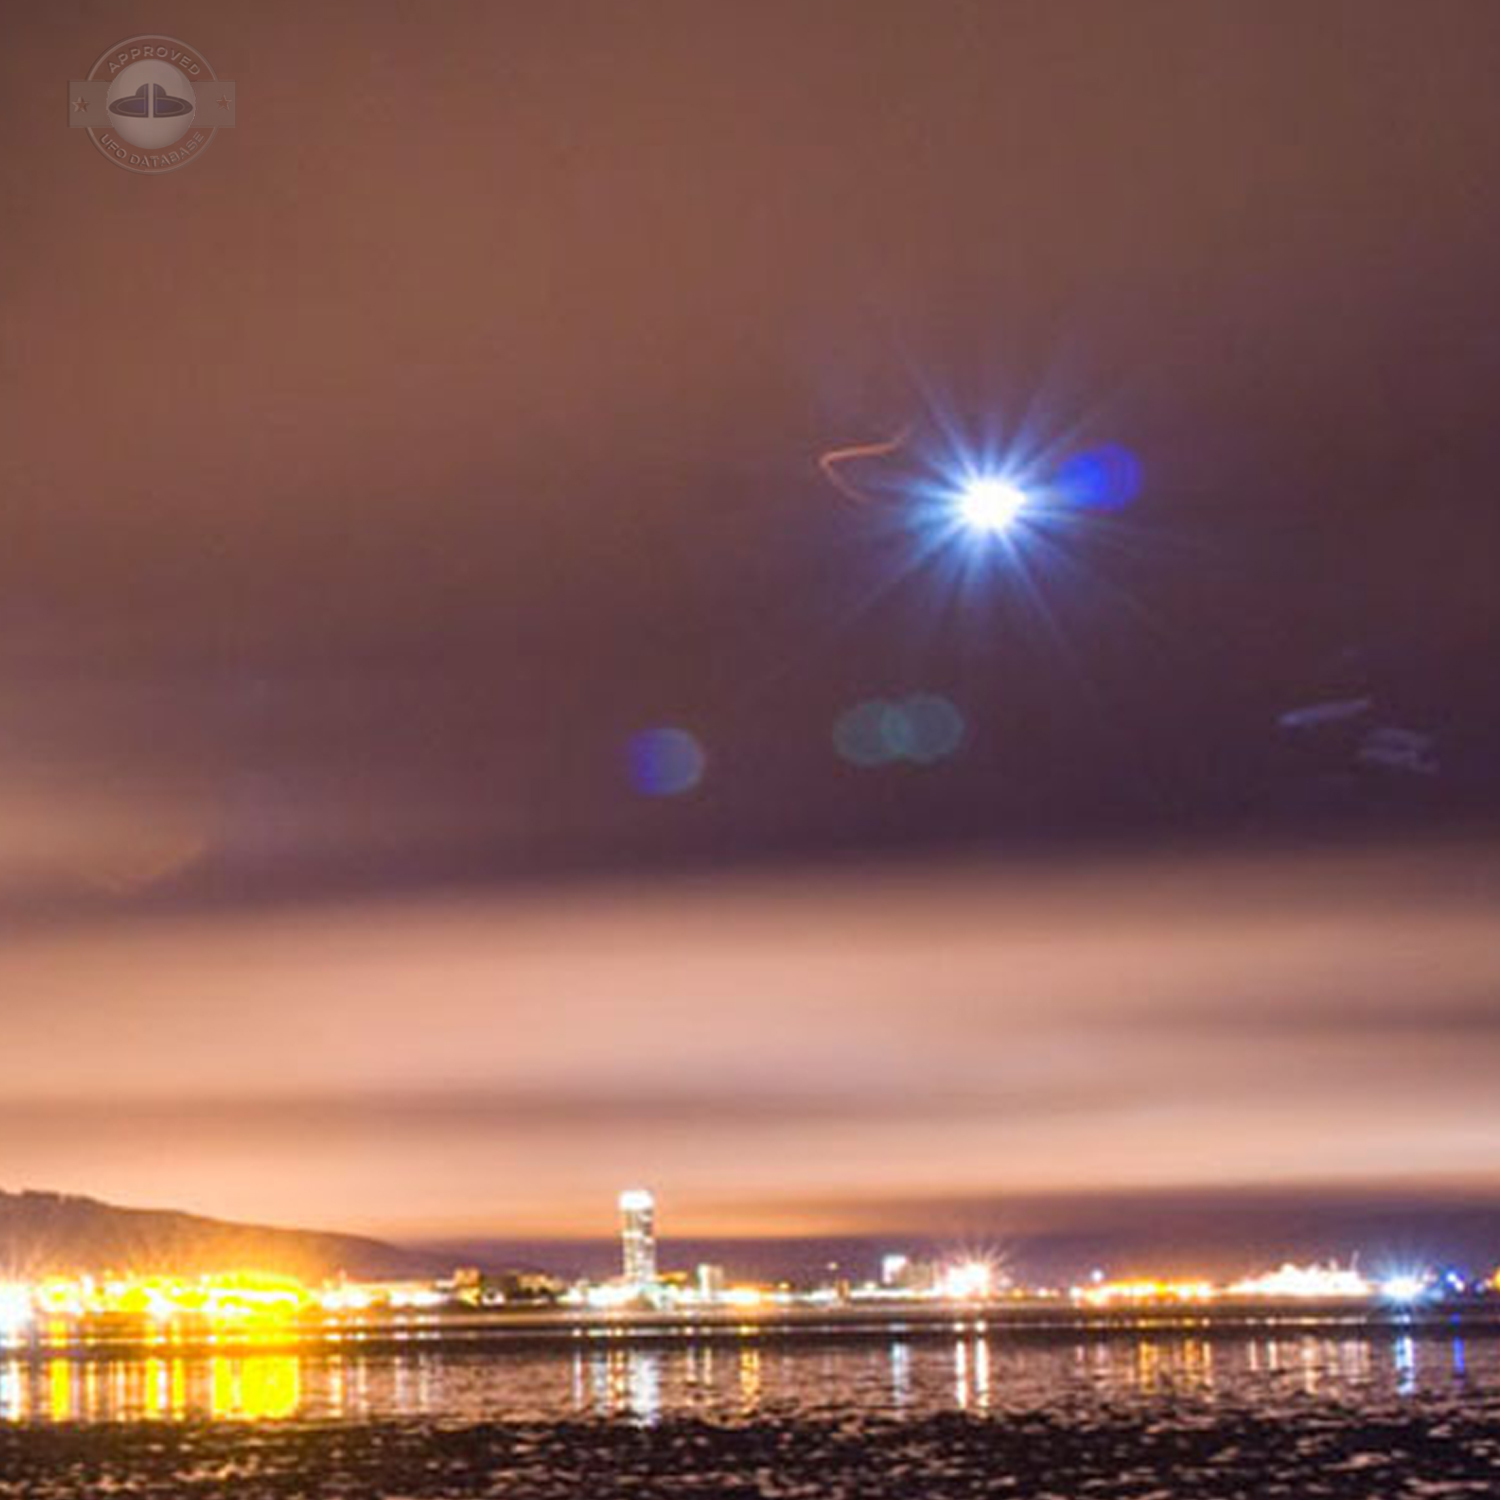 Bright glowing UFO caught on picture during long exposure | England UFO Picture #218-3